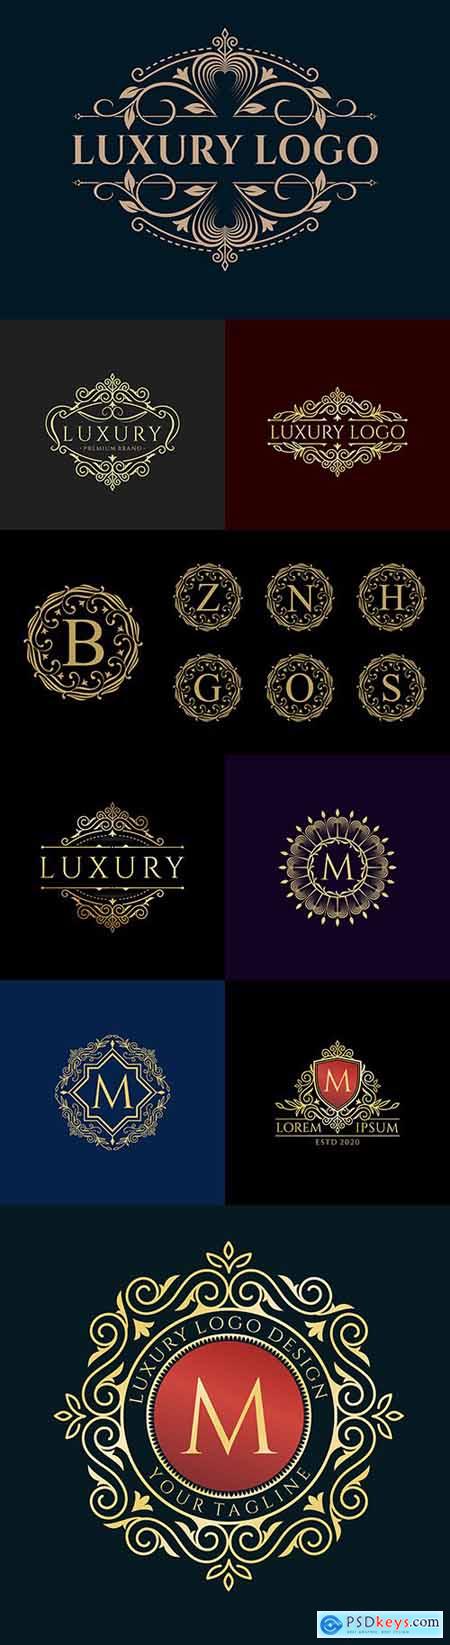 Letter and vintage luxurious logo collection design